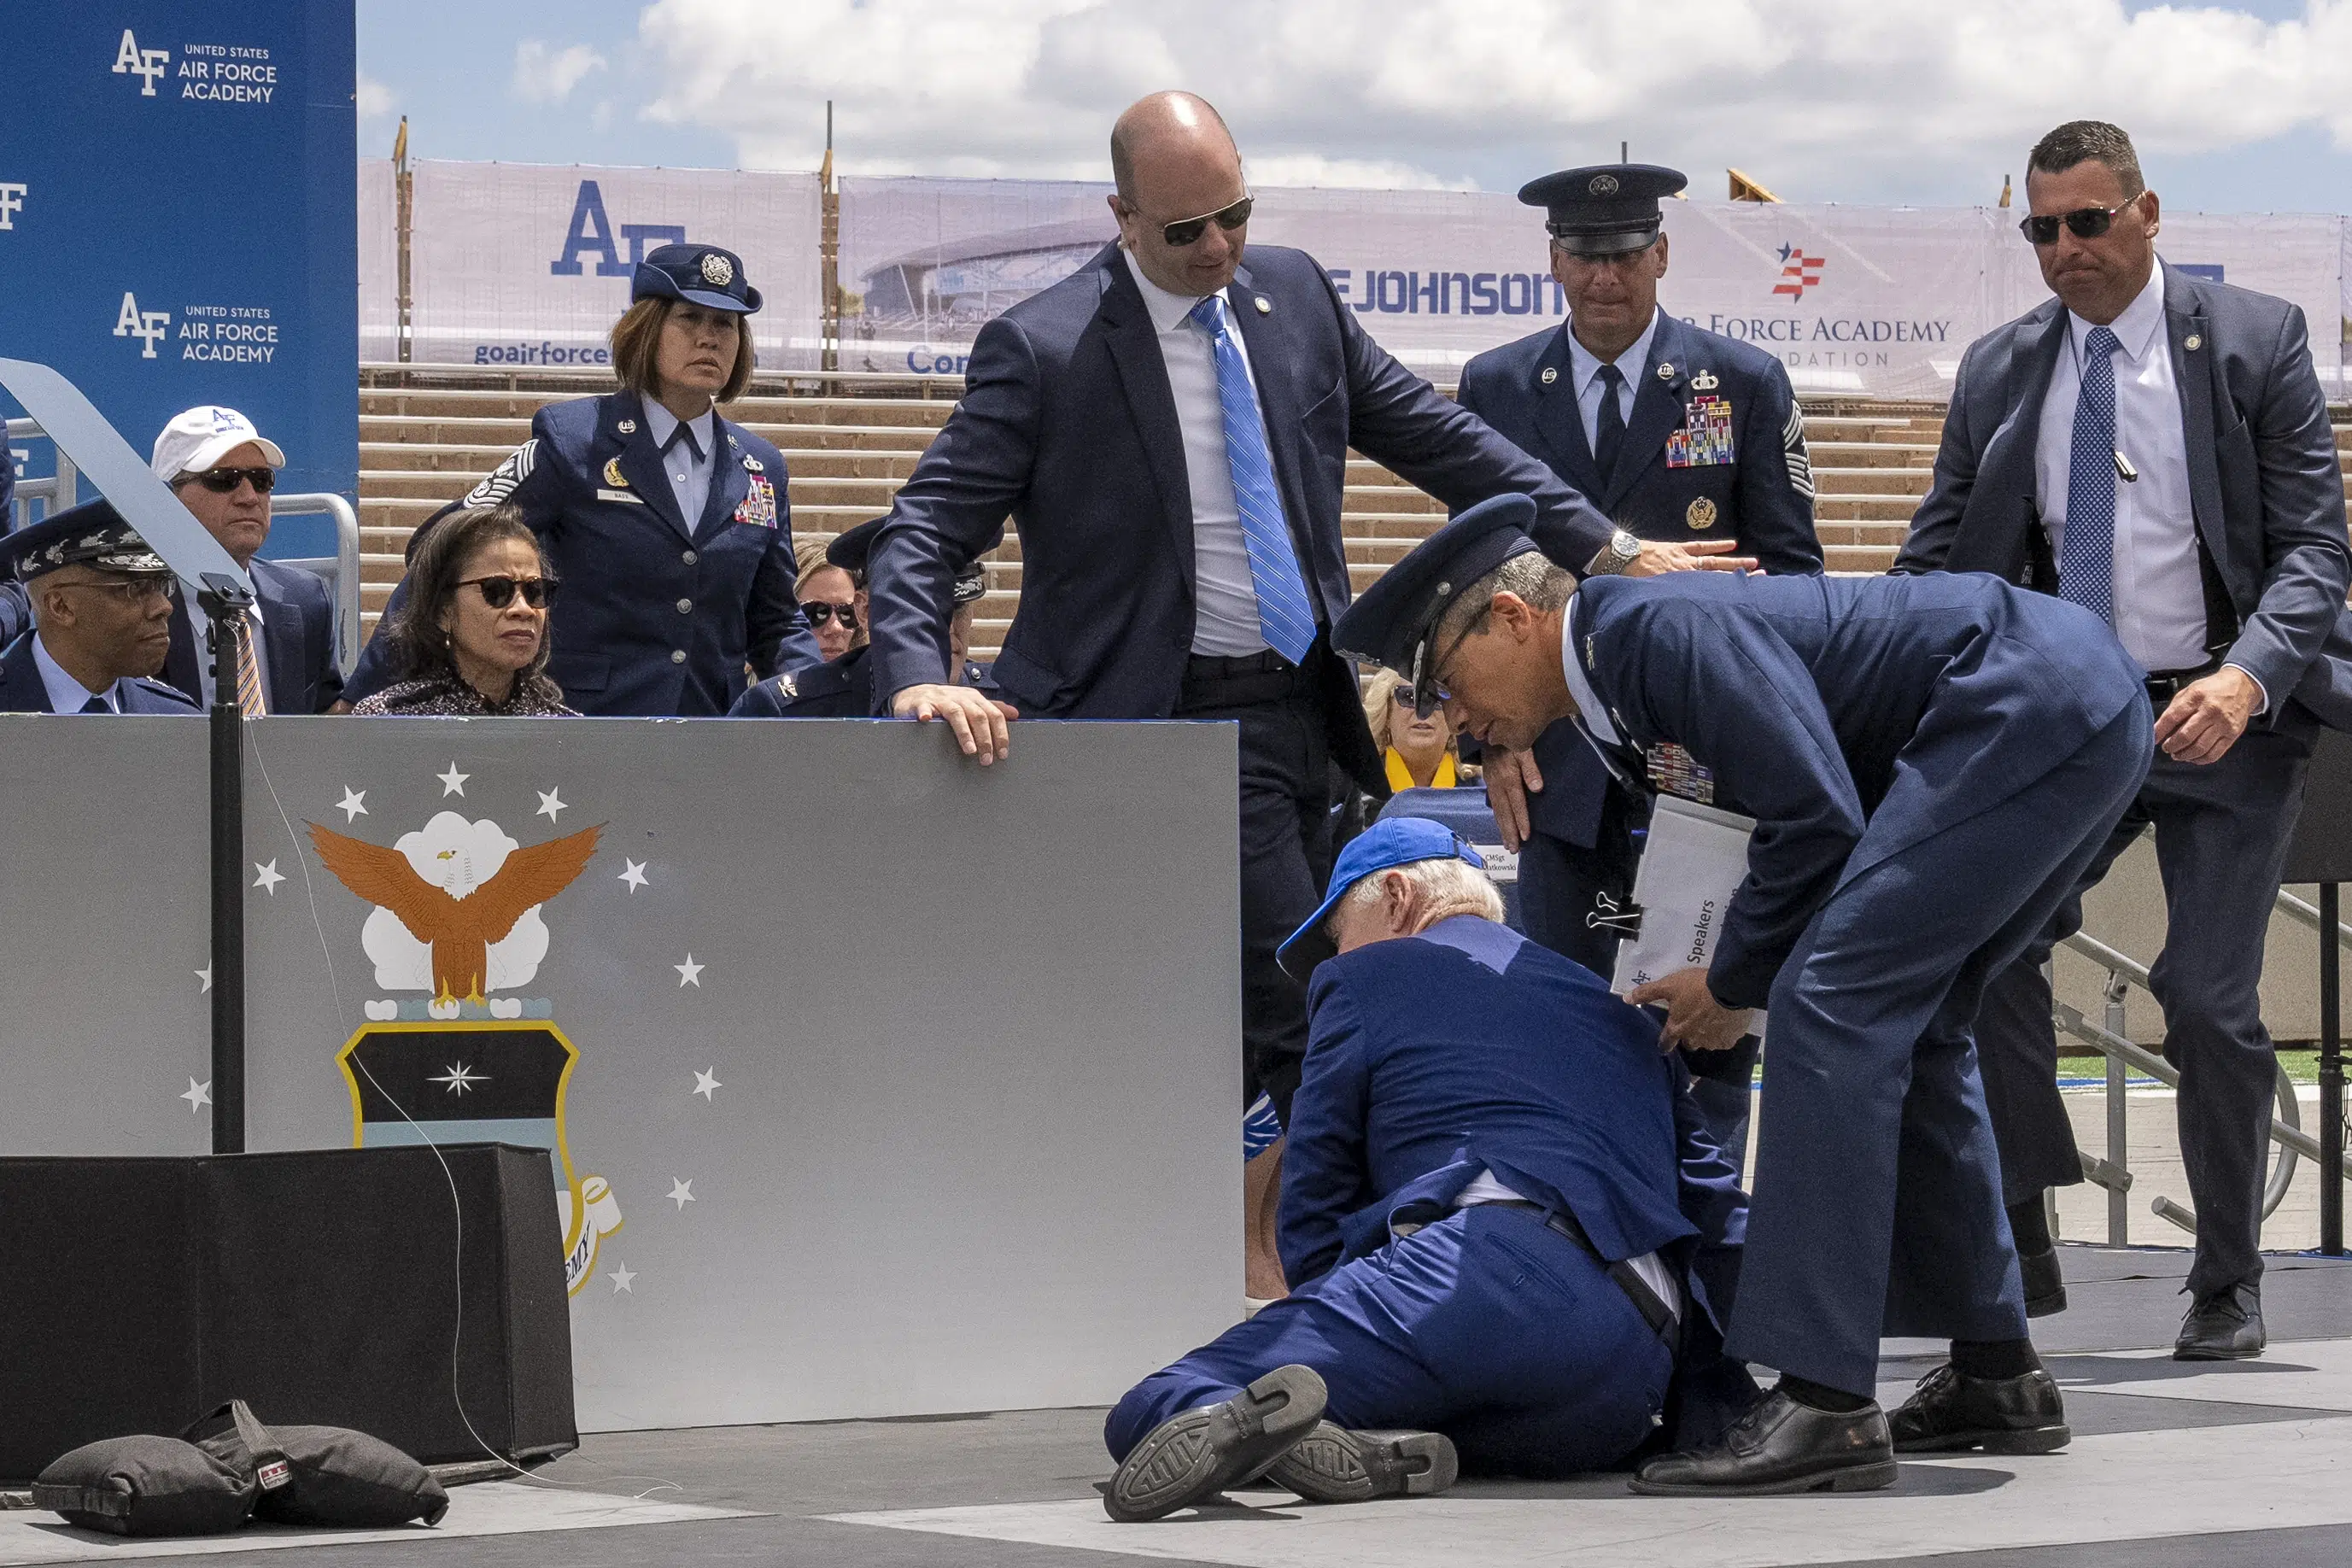 Biden trips and falls on stage at Air Force graduation; White House says he’s ‘fine’